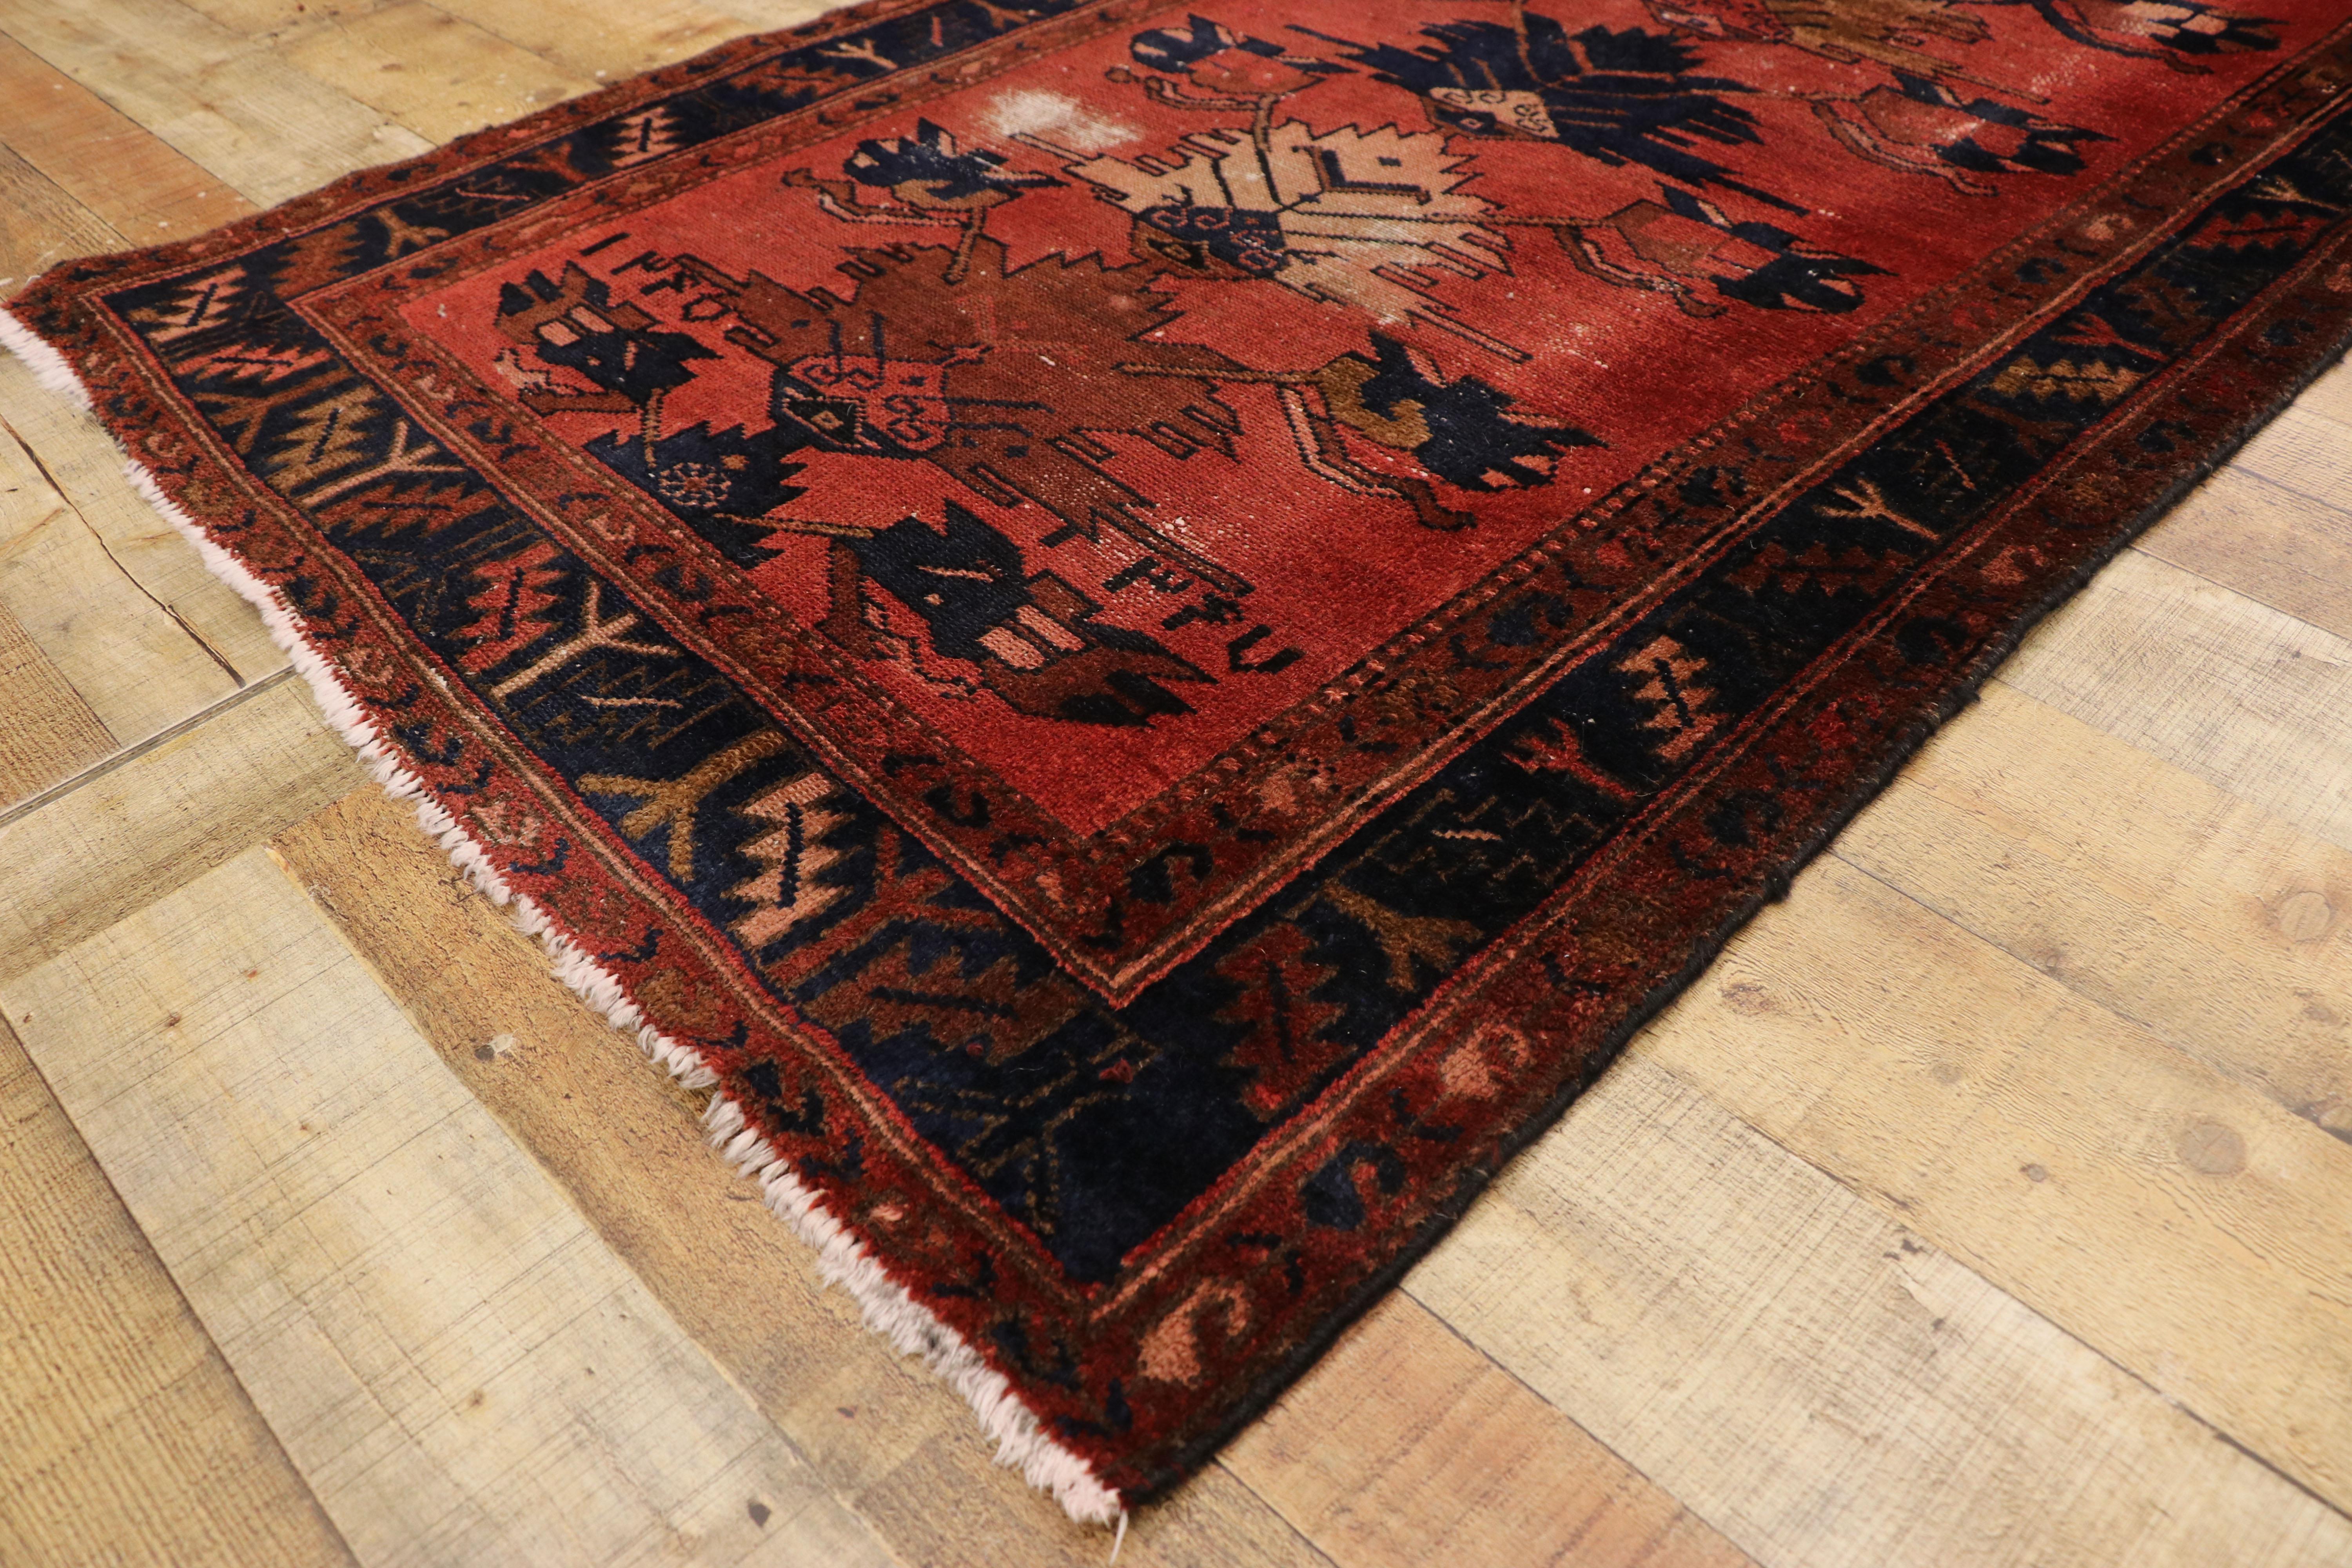 20th Century Distressed Antique Persian Hamadan Runner with Rustic English Manor Tudor Style For Sale